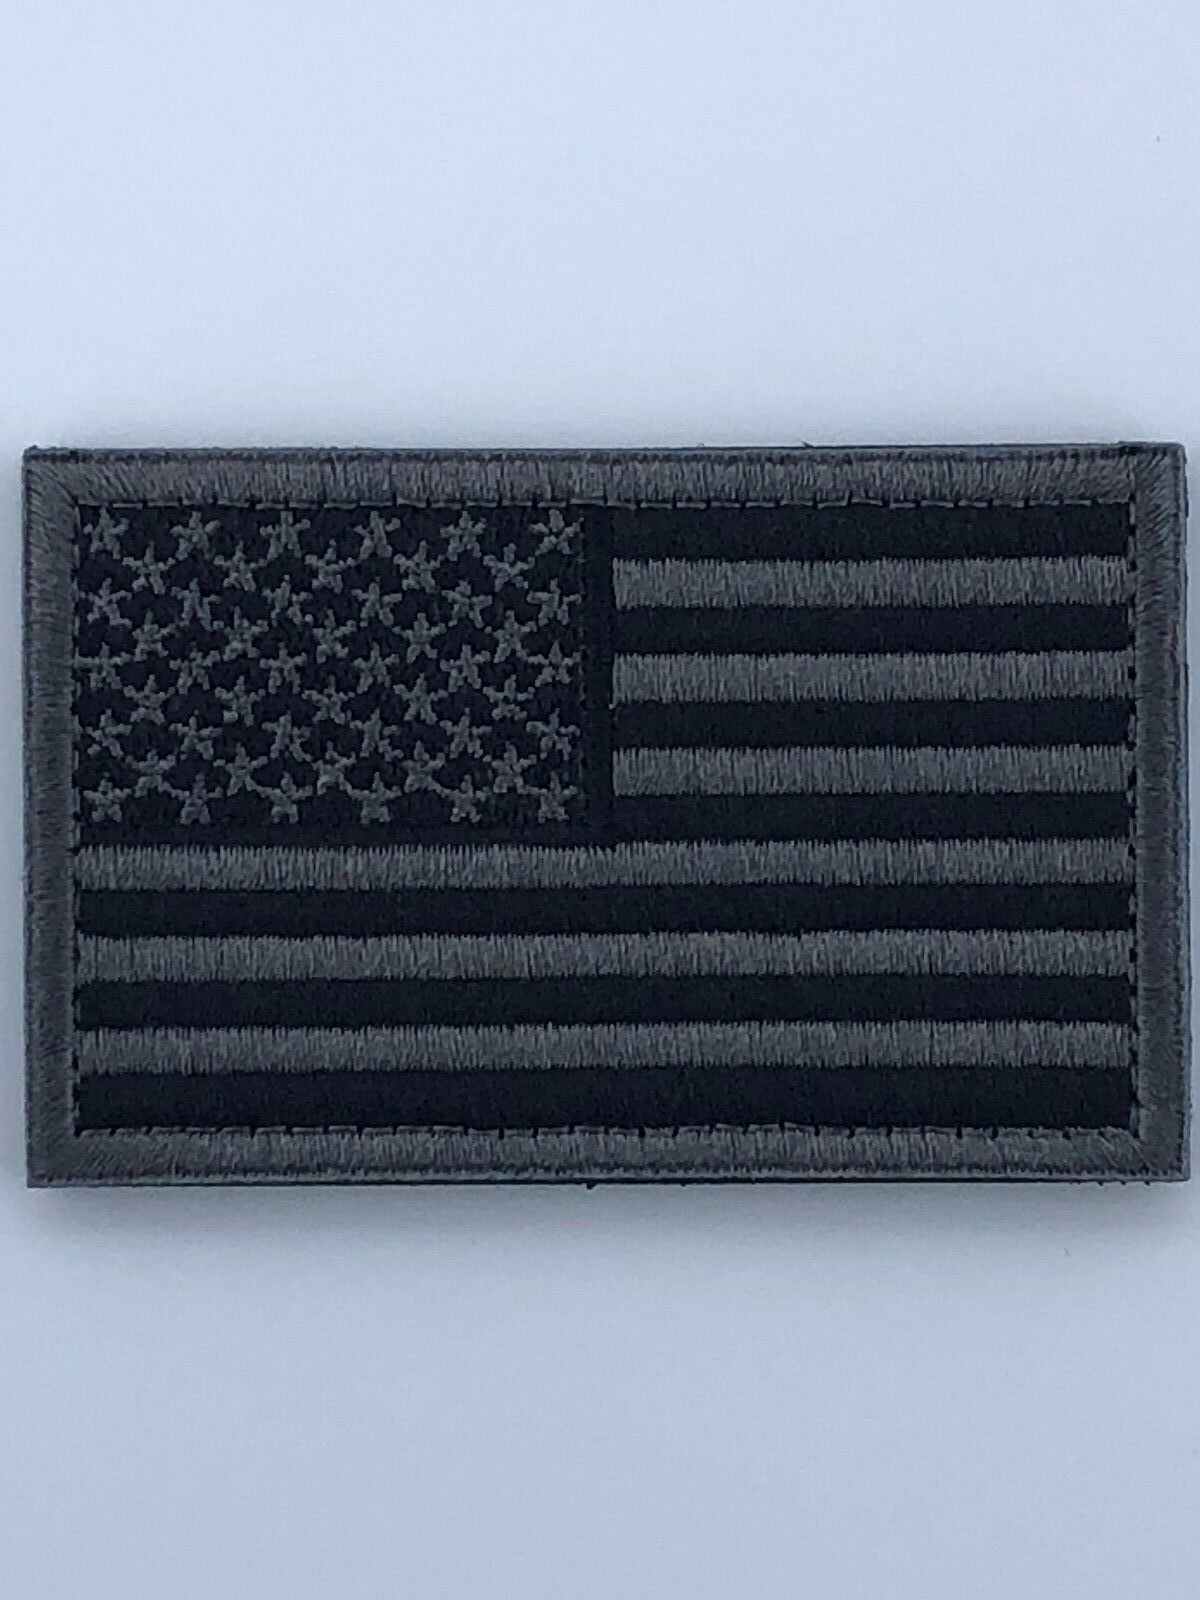 USA American Flag Patch 2 x 3 Hook & Loop Military Tactical